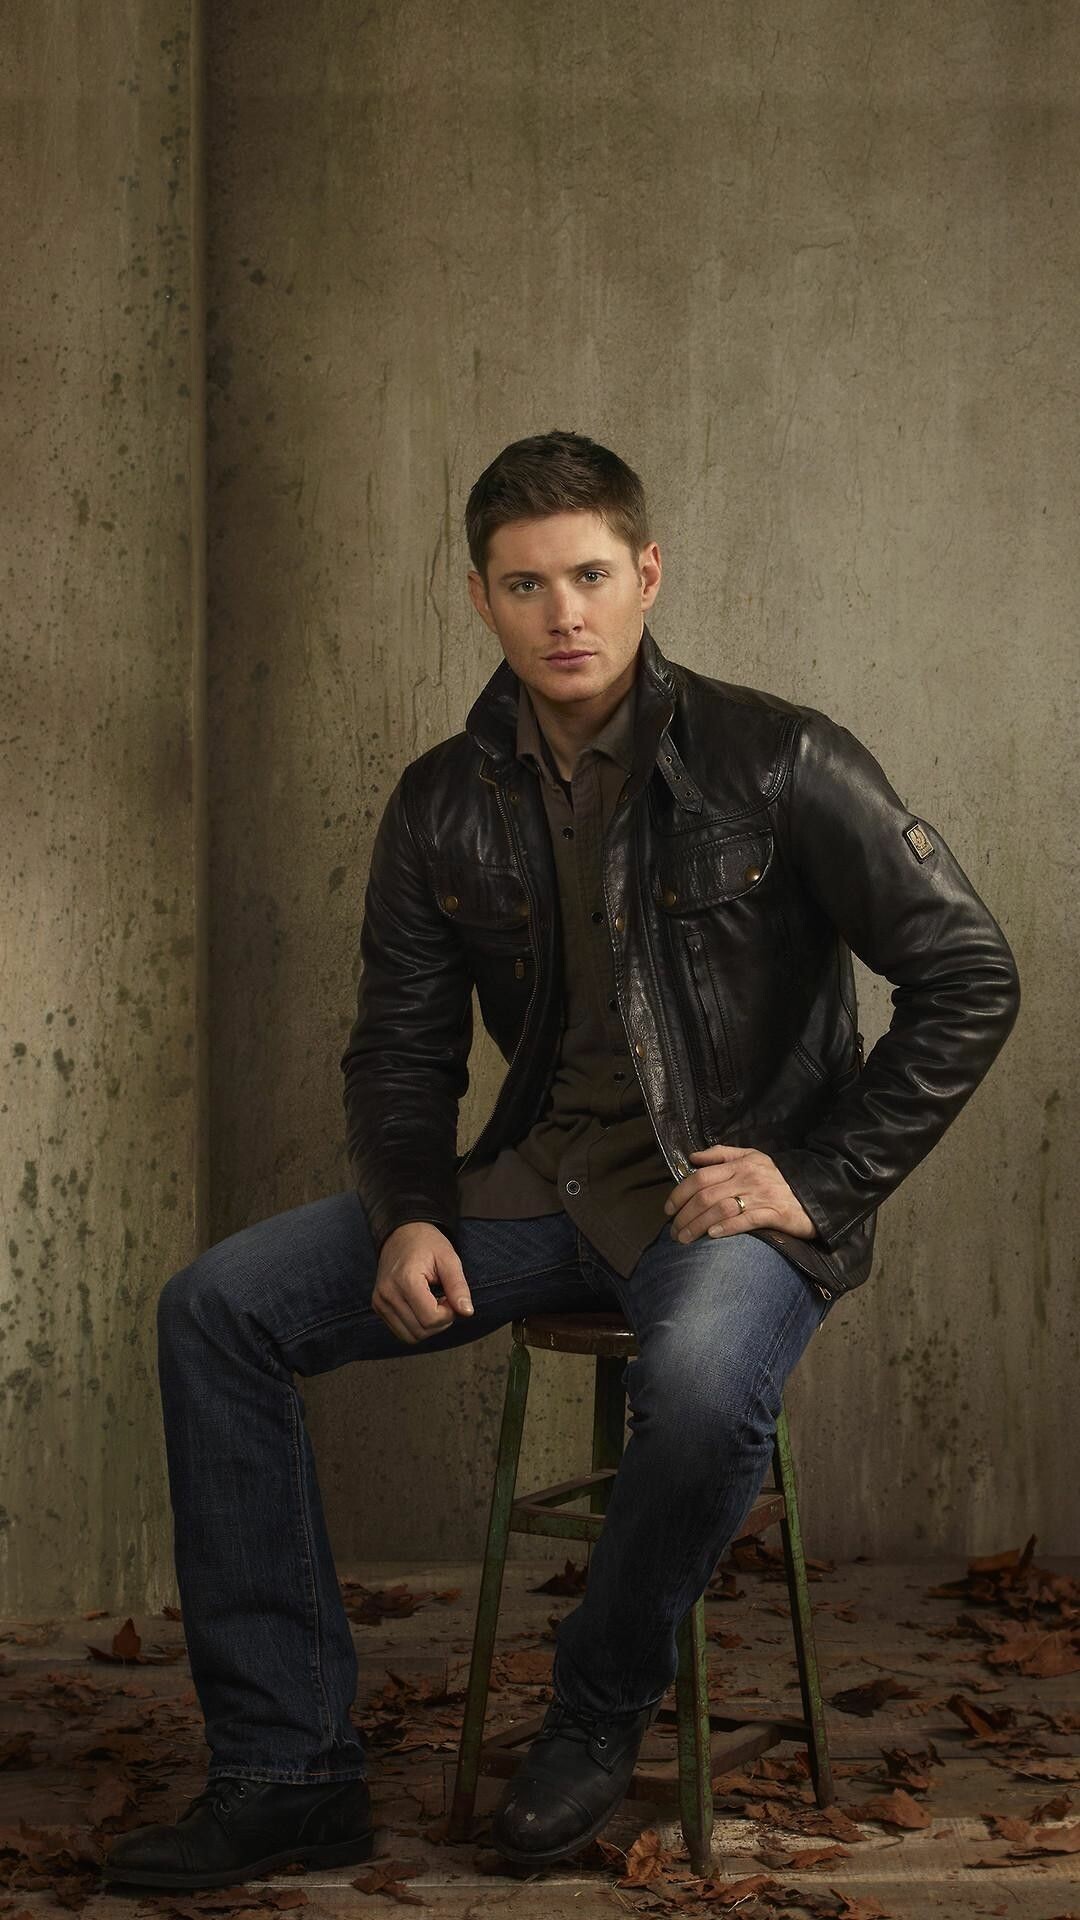 Jensen Ackles: Starred as Dean Winchester in a dark fantasy television series, The Winchesters. 1080x1920 Full HD Background.